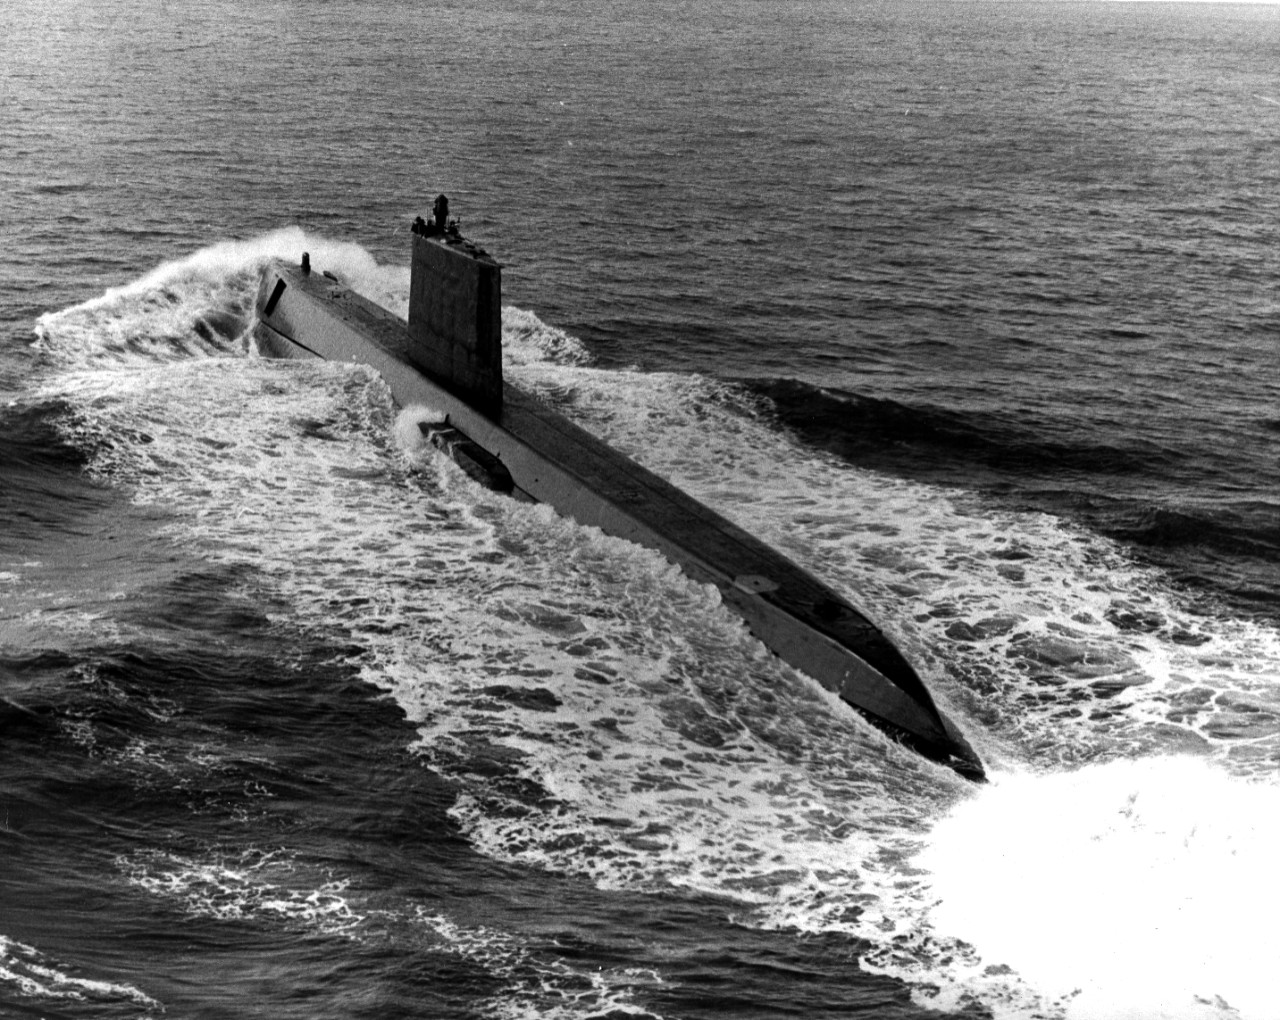 <p>Groton, CT - the nuclear powered submarine USS Nautilus (SSN-571), during sea trials.</p>
